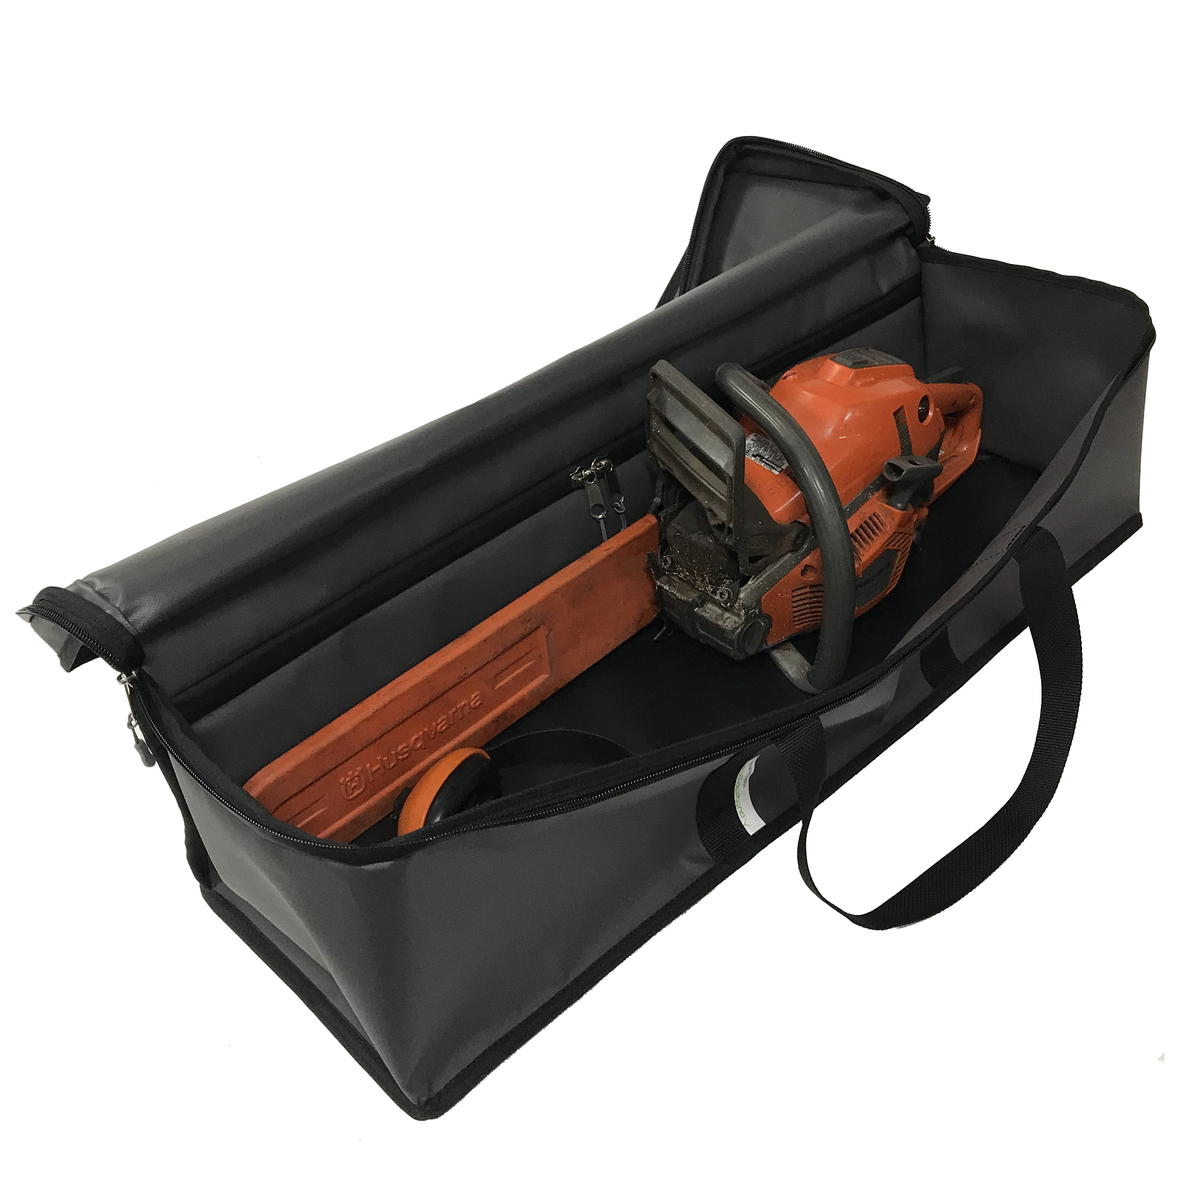 Water resistant chainsaw carry bag